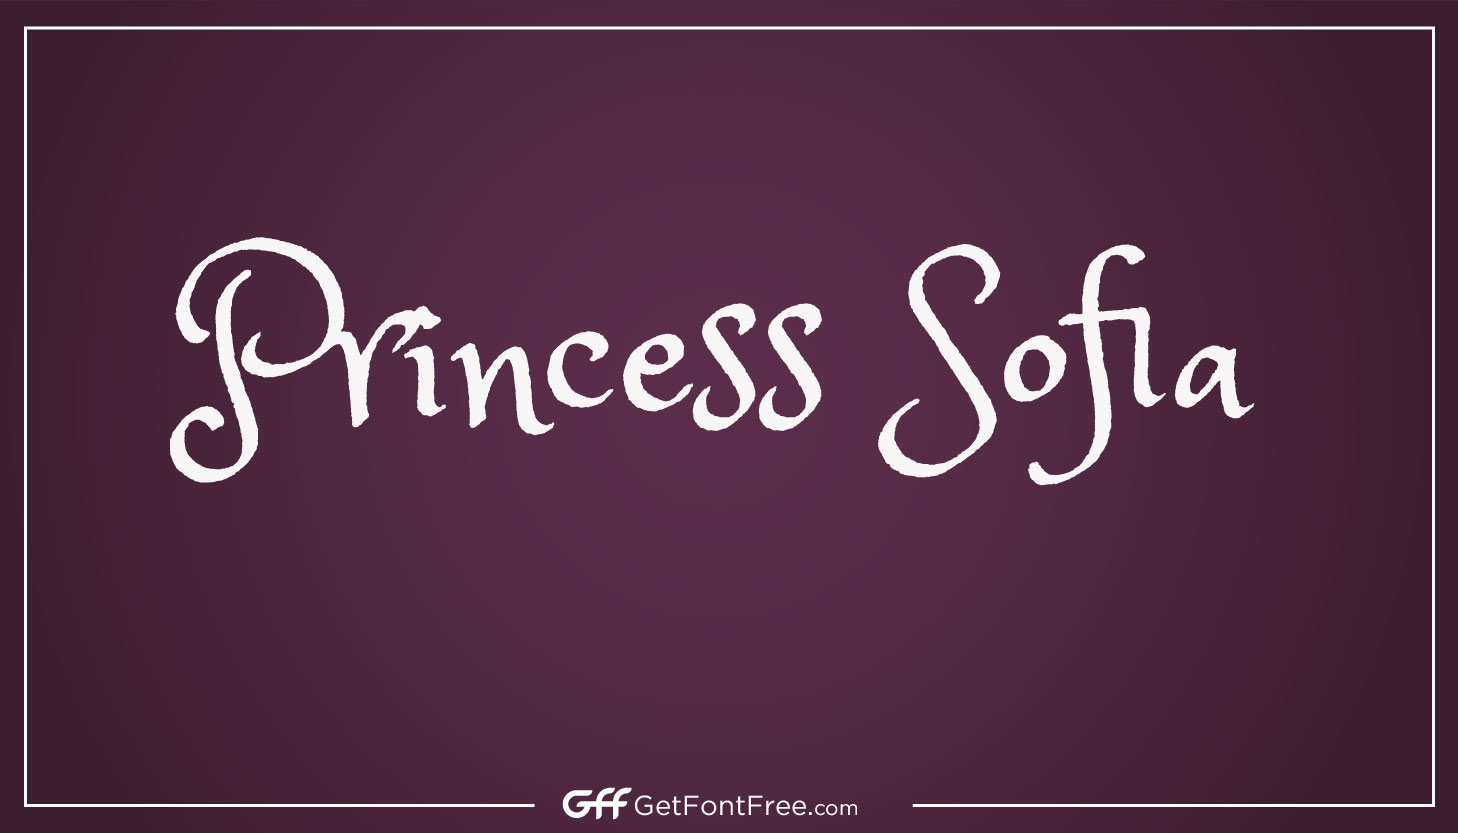 Princess Sofia Font is a popular animated television series produced by Disney Junior. The show follows the adventures of a young girl named Sofia who becomes a princess after her mother marries a king. The series premiered in January 2013 and has since become a favorite among children and families around the world.